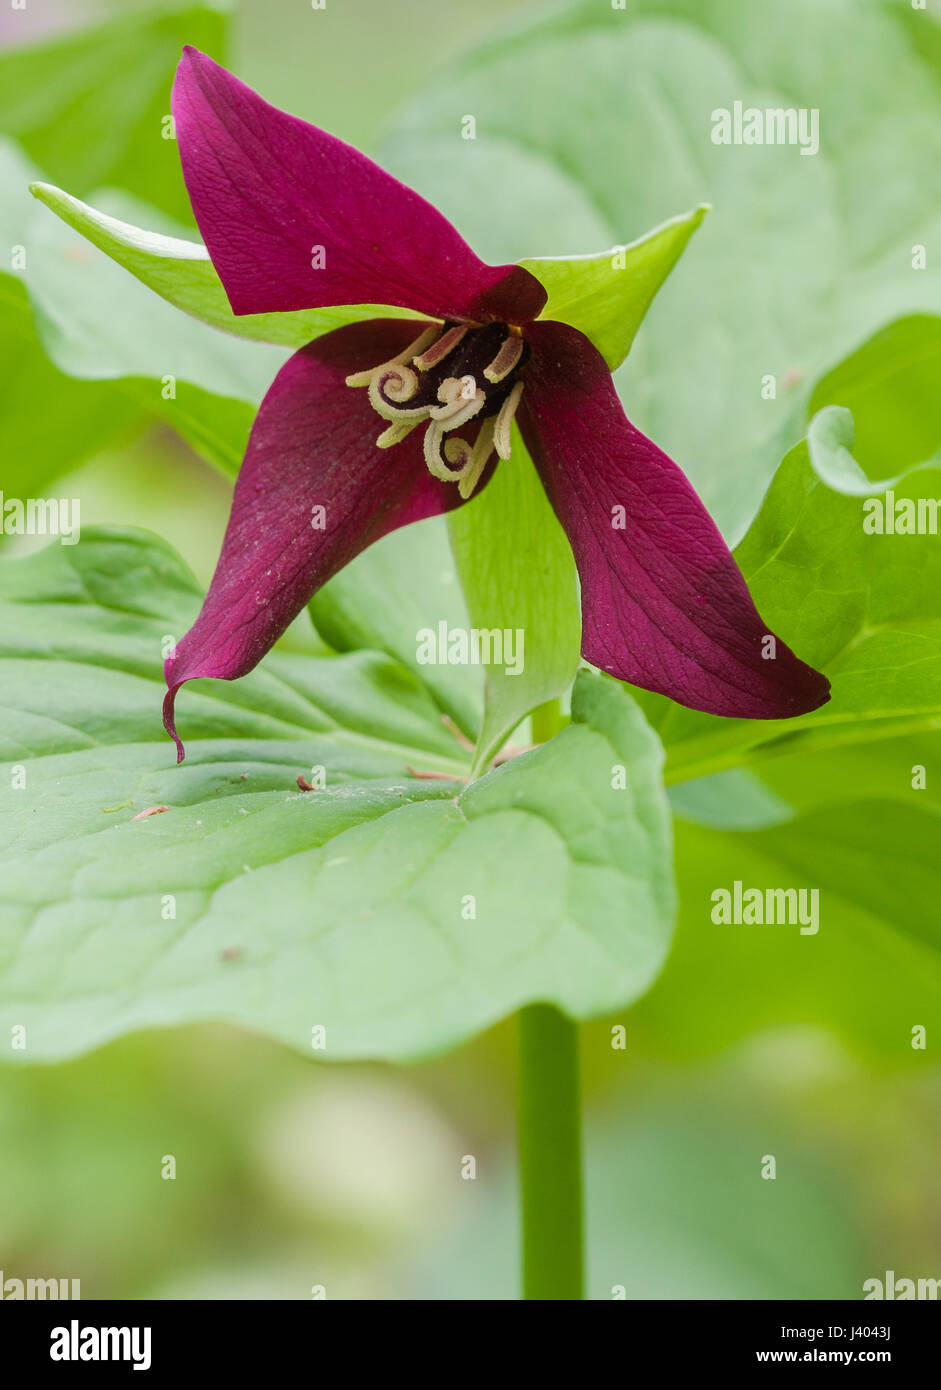 The red trillium is found in woodlands and is also known as a stinking Benjamin. Stock Photo